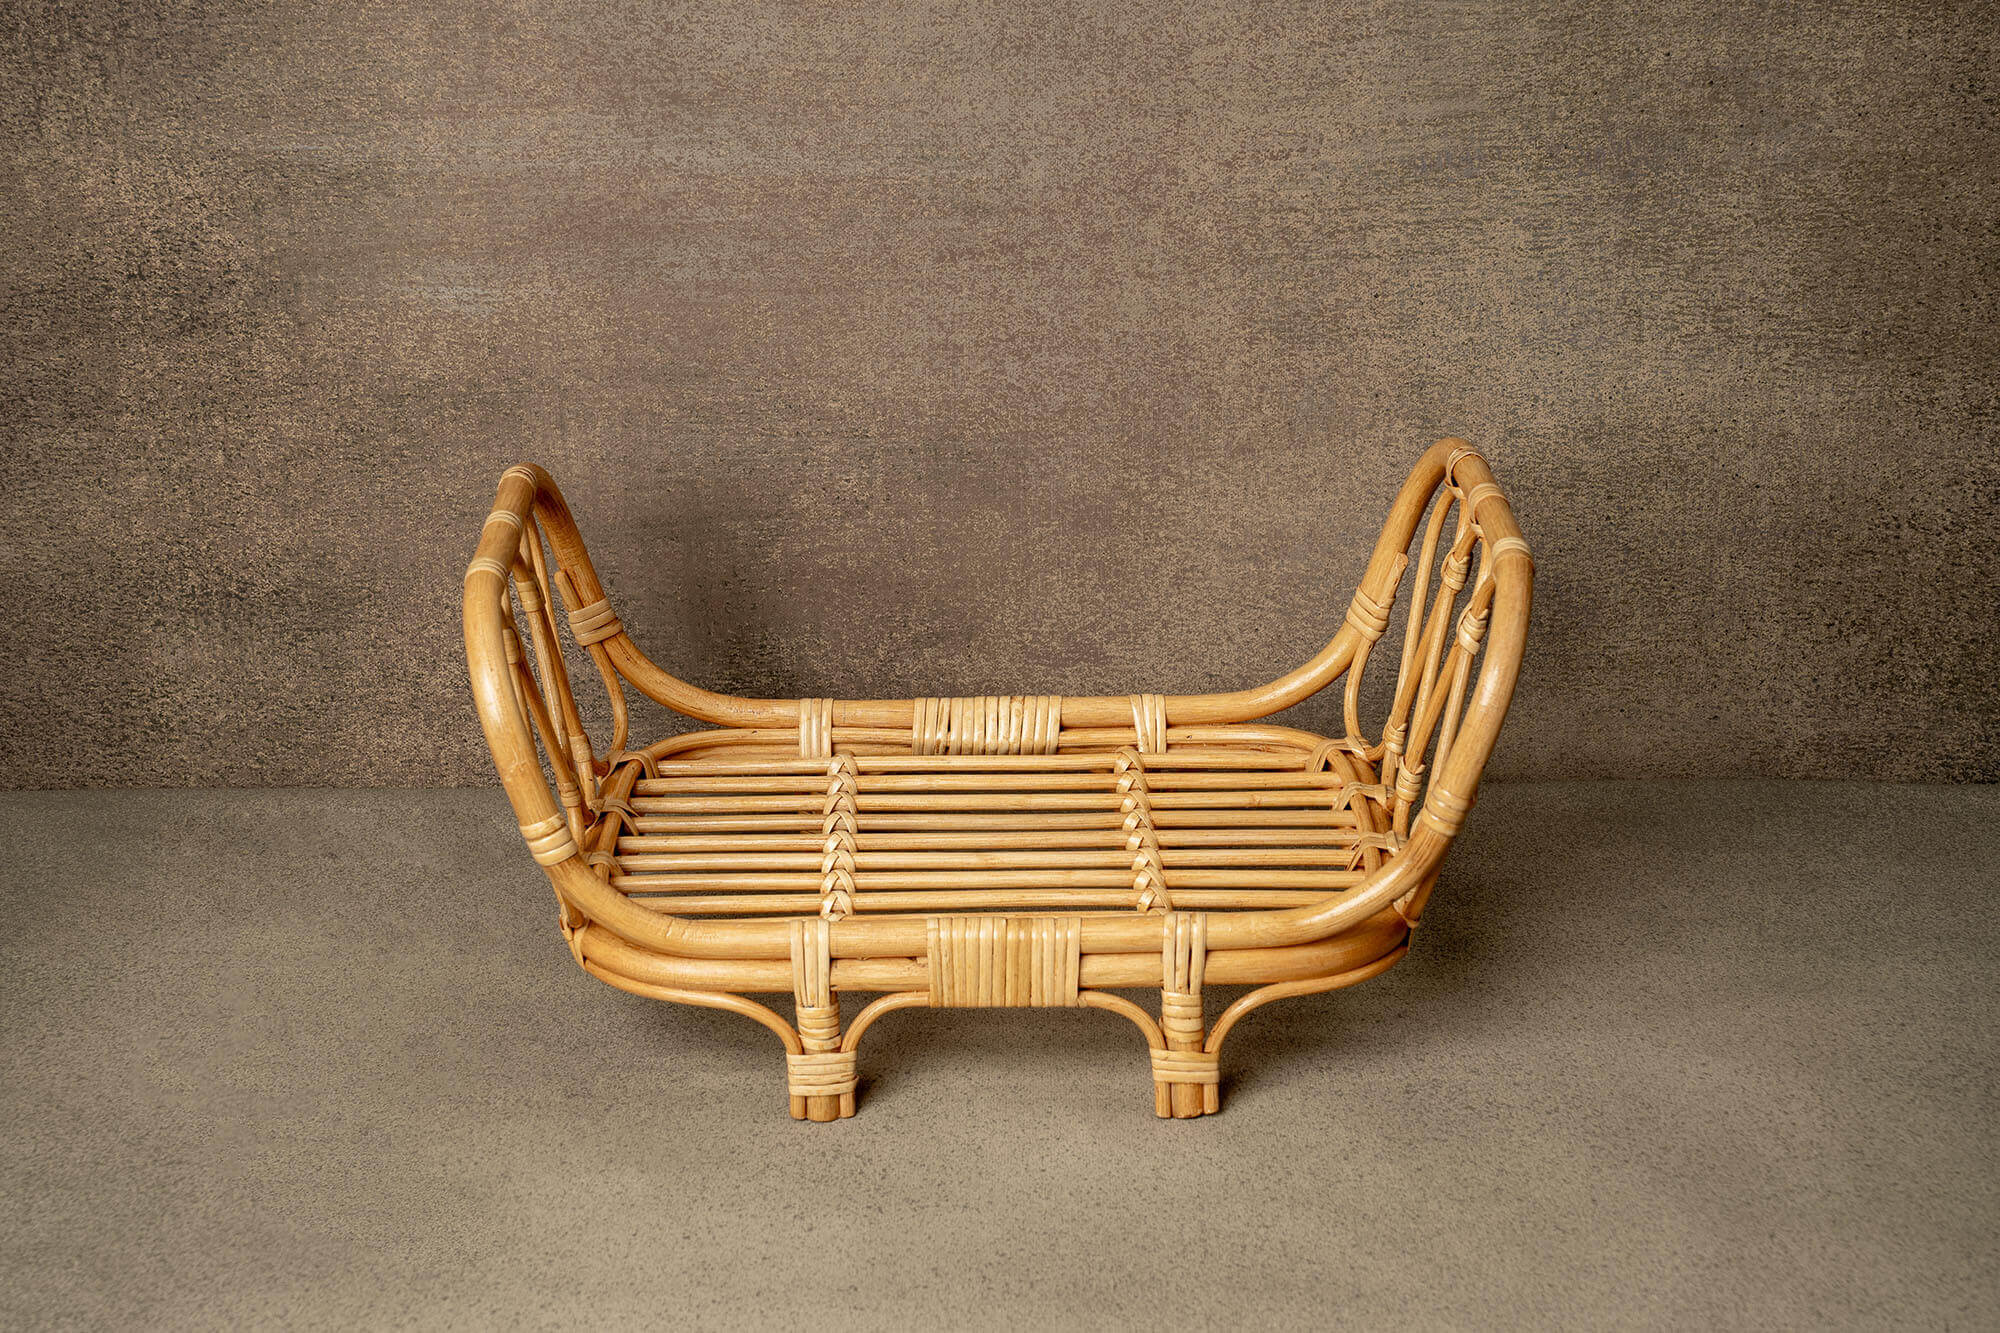 Kate Bamboo Woven Chair Bed Newborn Bed Props